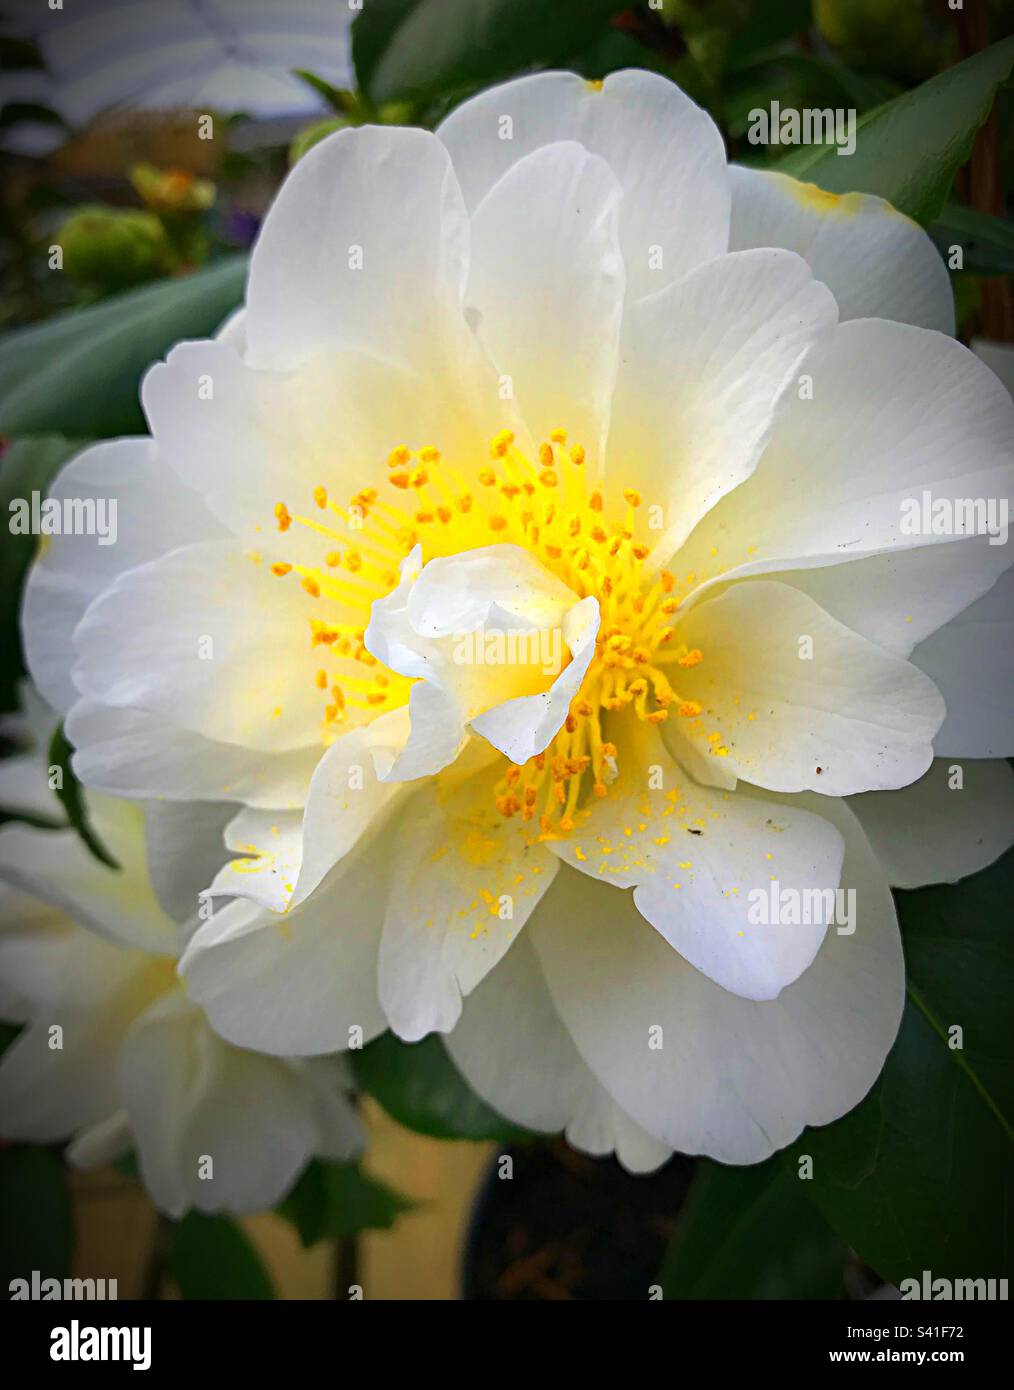 This semi double white peony formed flowers are studded in the centre with golden anthers. Camellia Silver Anniversary has glossy deep green foliage. A lovely anniversary present to celebrate 25 years Stock Photo